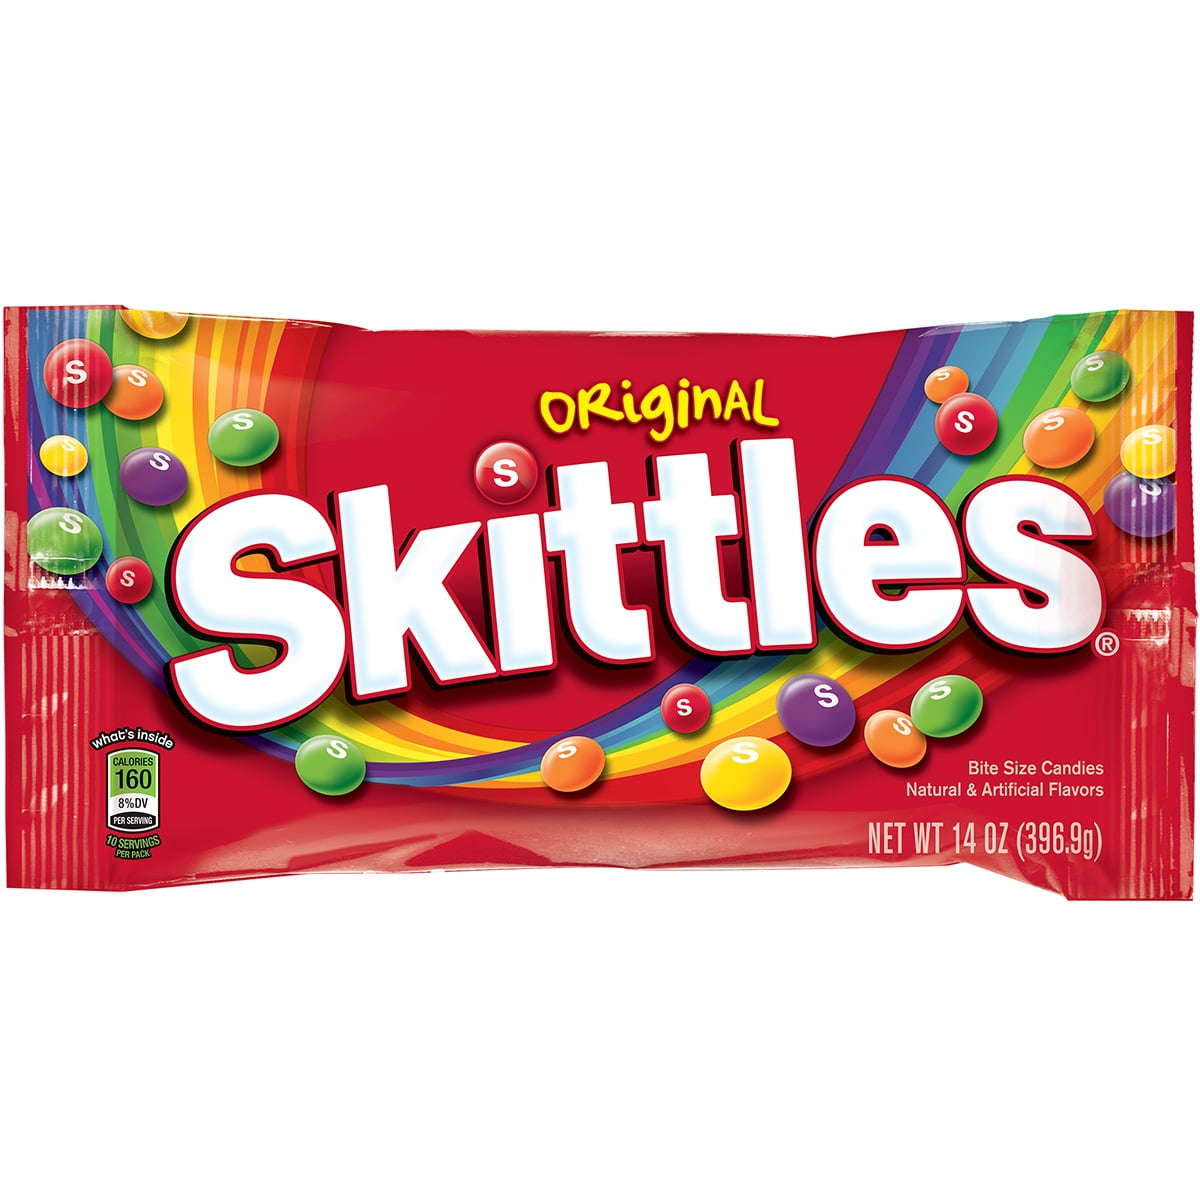 charles henry jones share picture of skittles photos